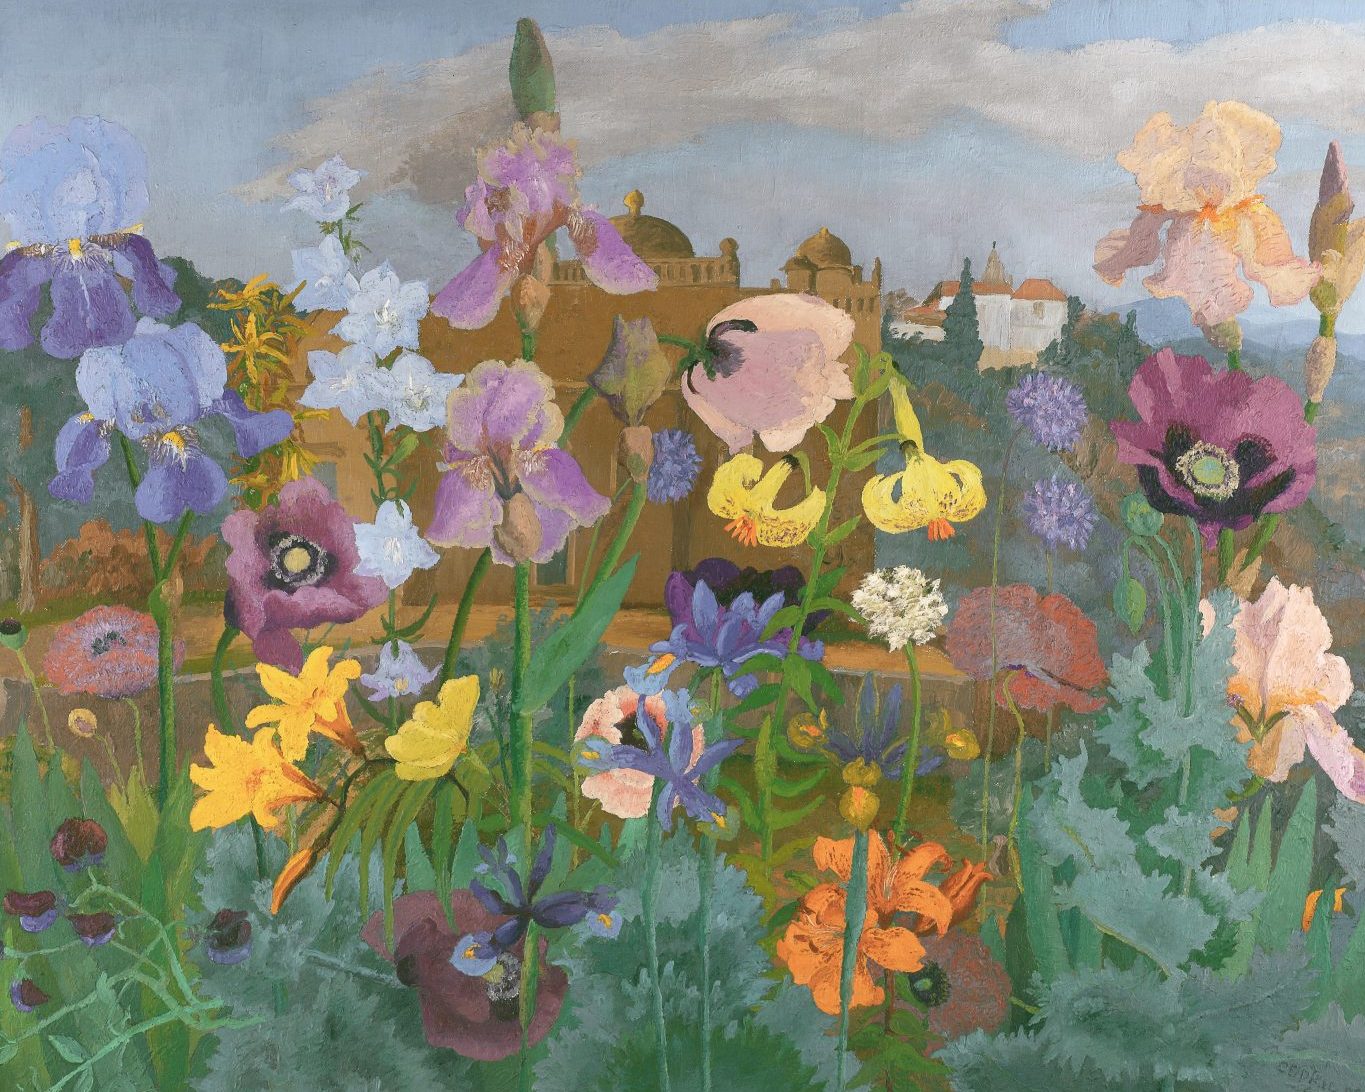 An image of a detail of the paining Flowers in a Portugese Landscape, by Cedric Morris. It dpeicts lots of european planting in a bright landscape.